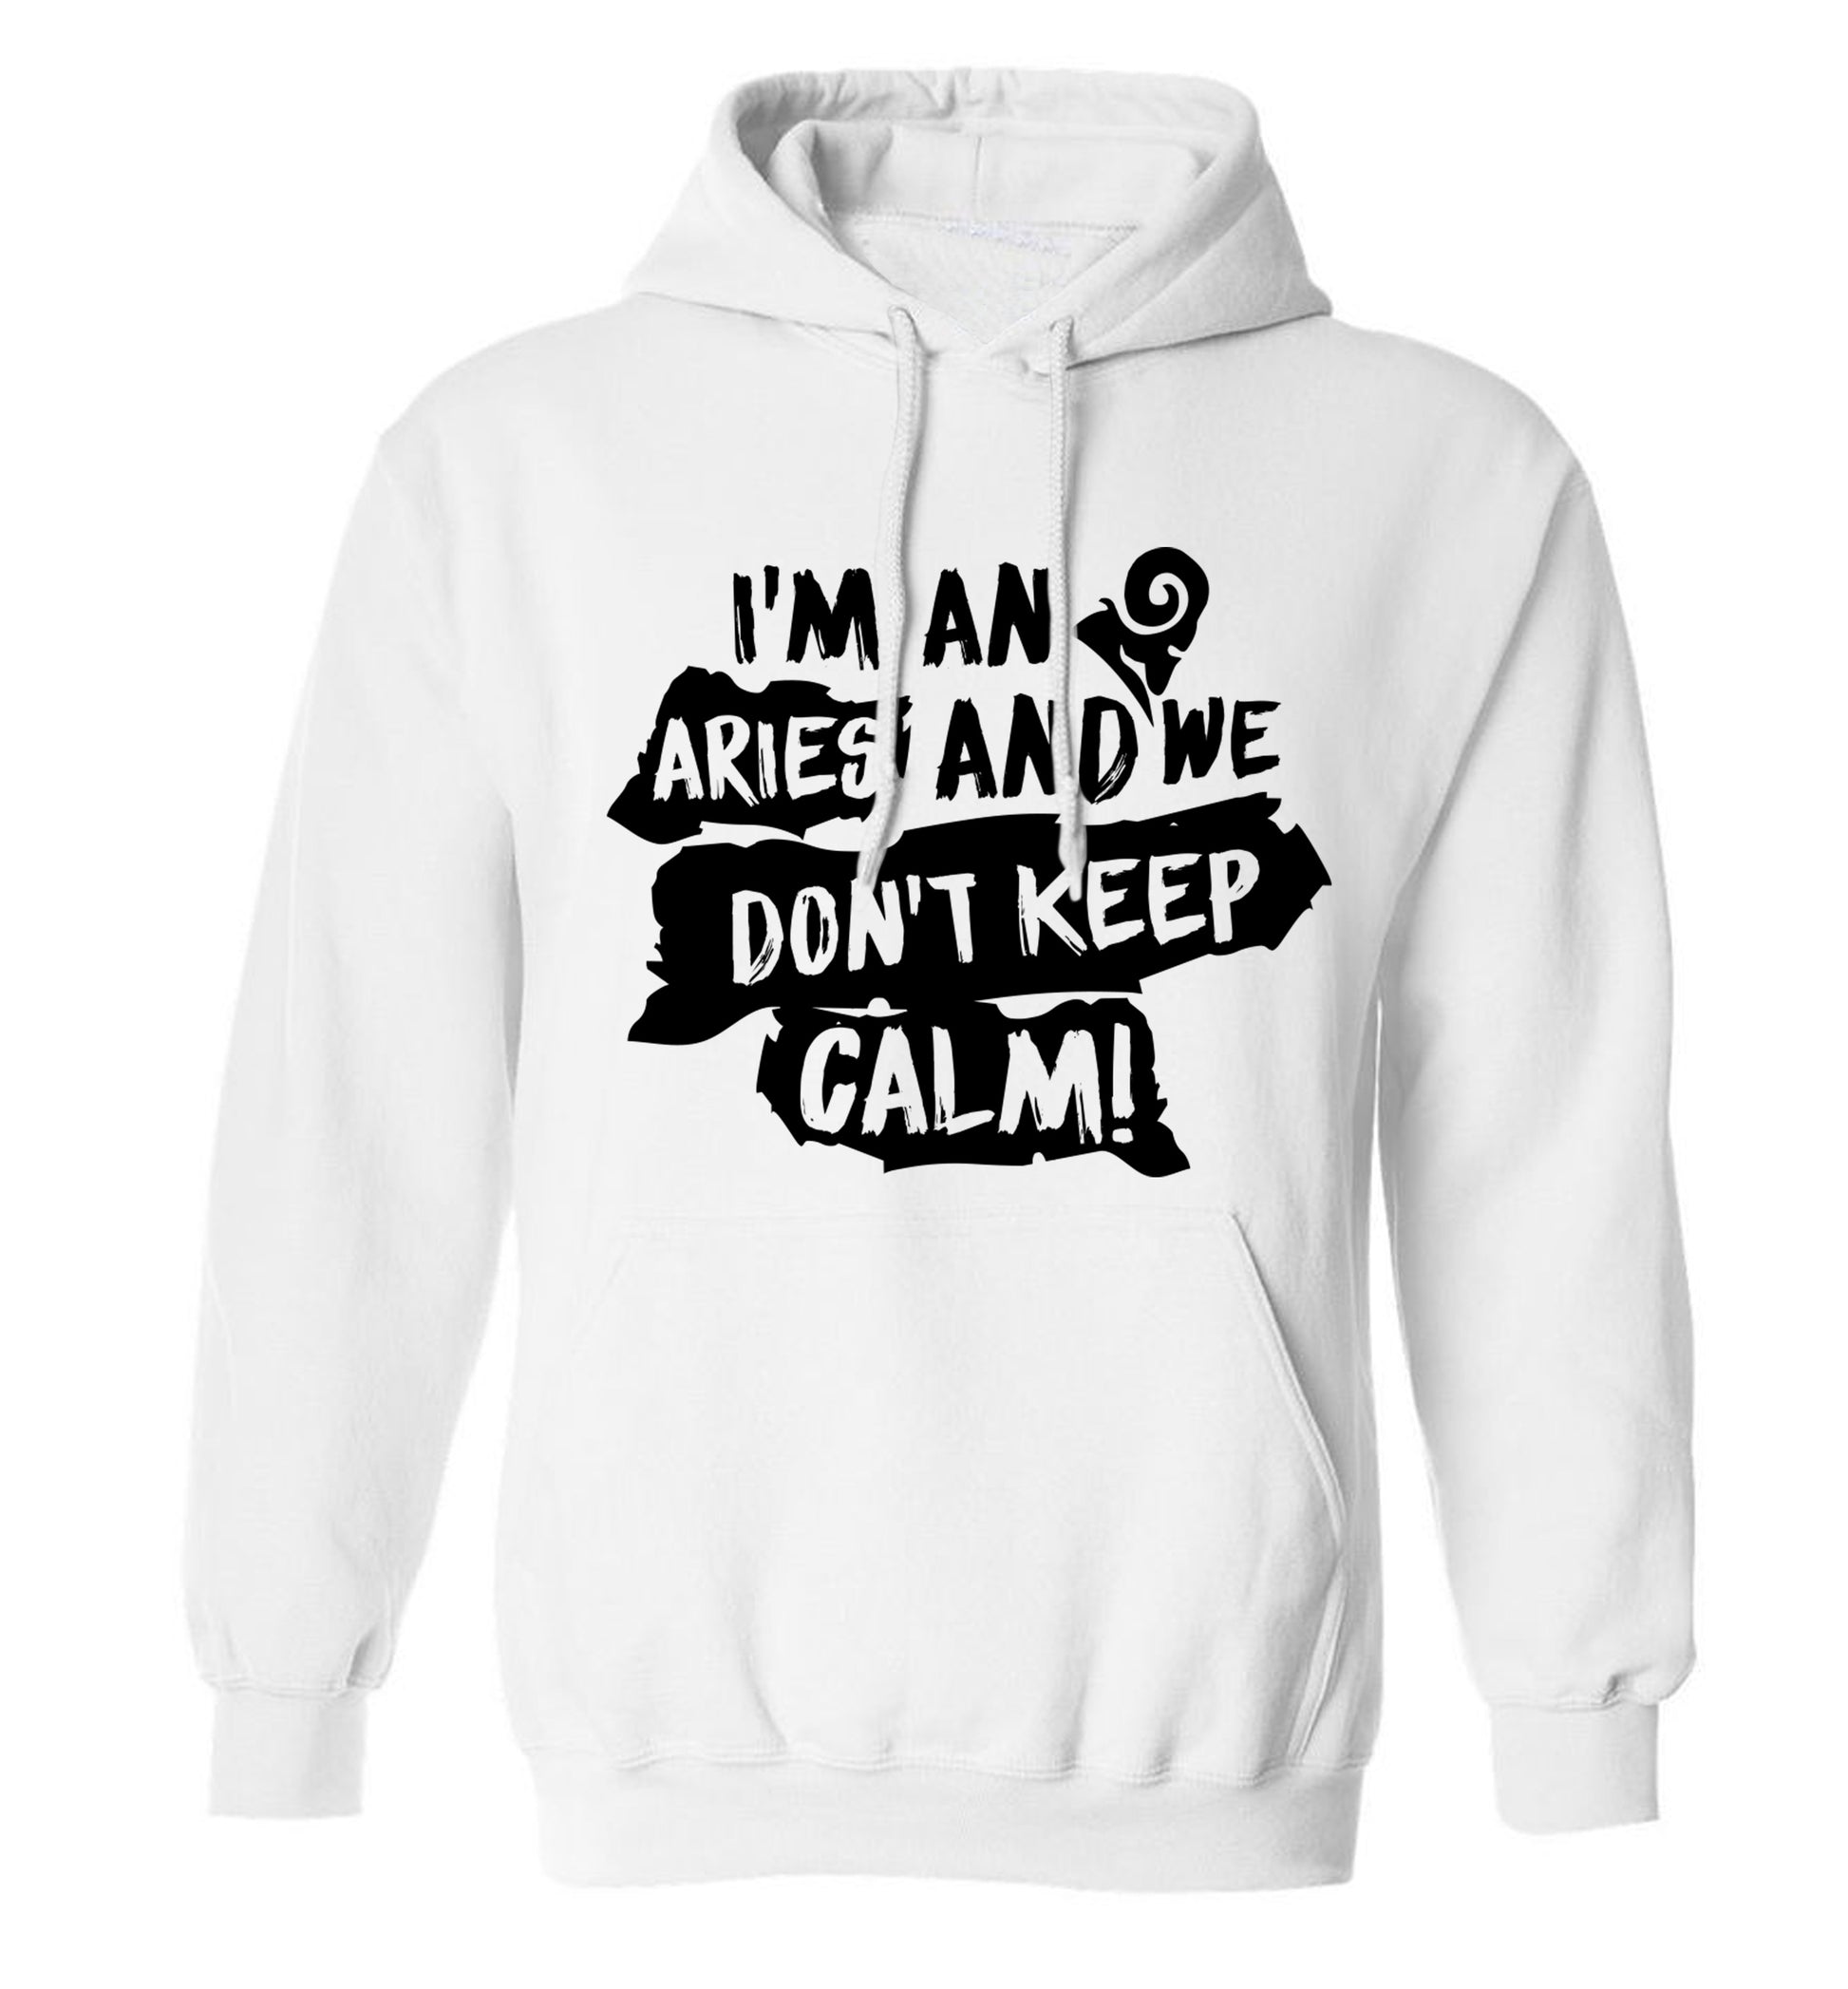 I'm an aries and we don't keep calm adults unisex white hoodie 2XL